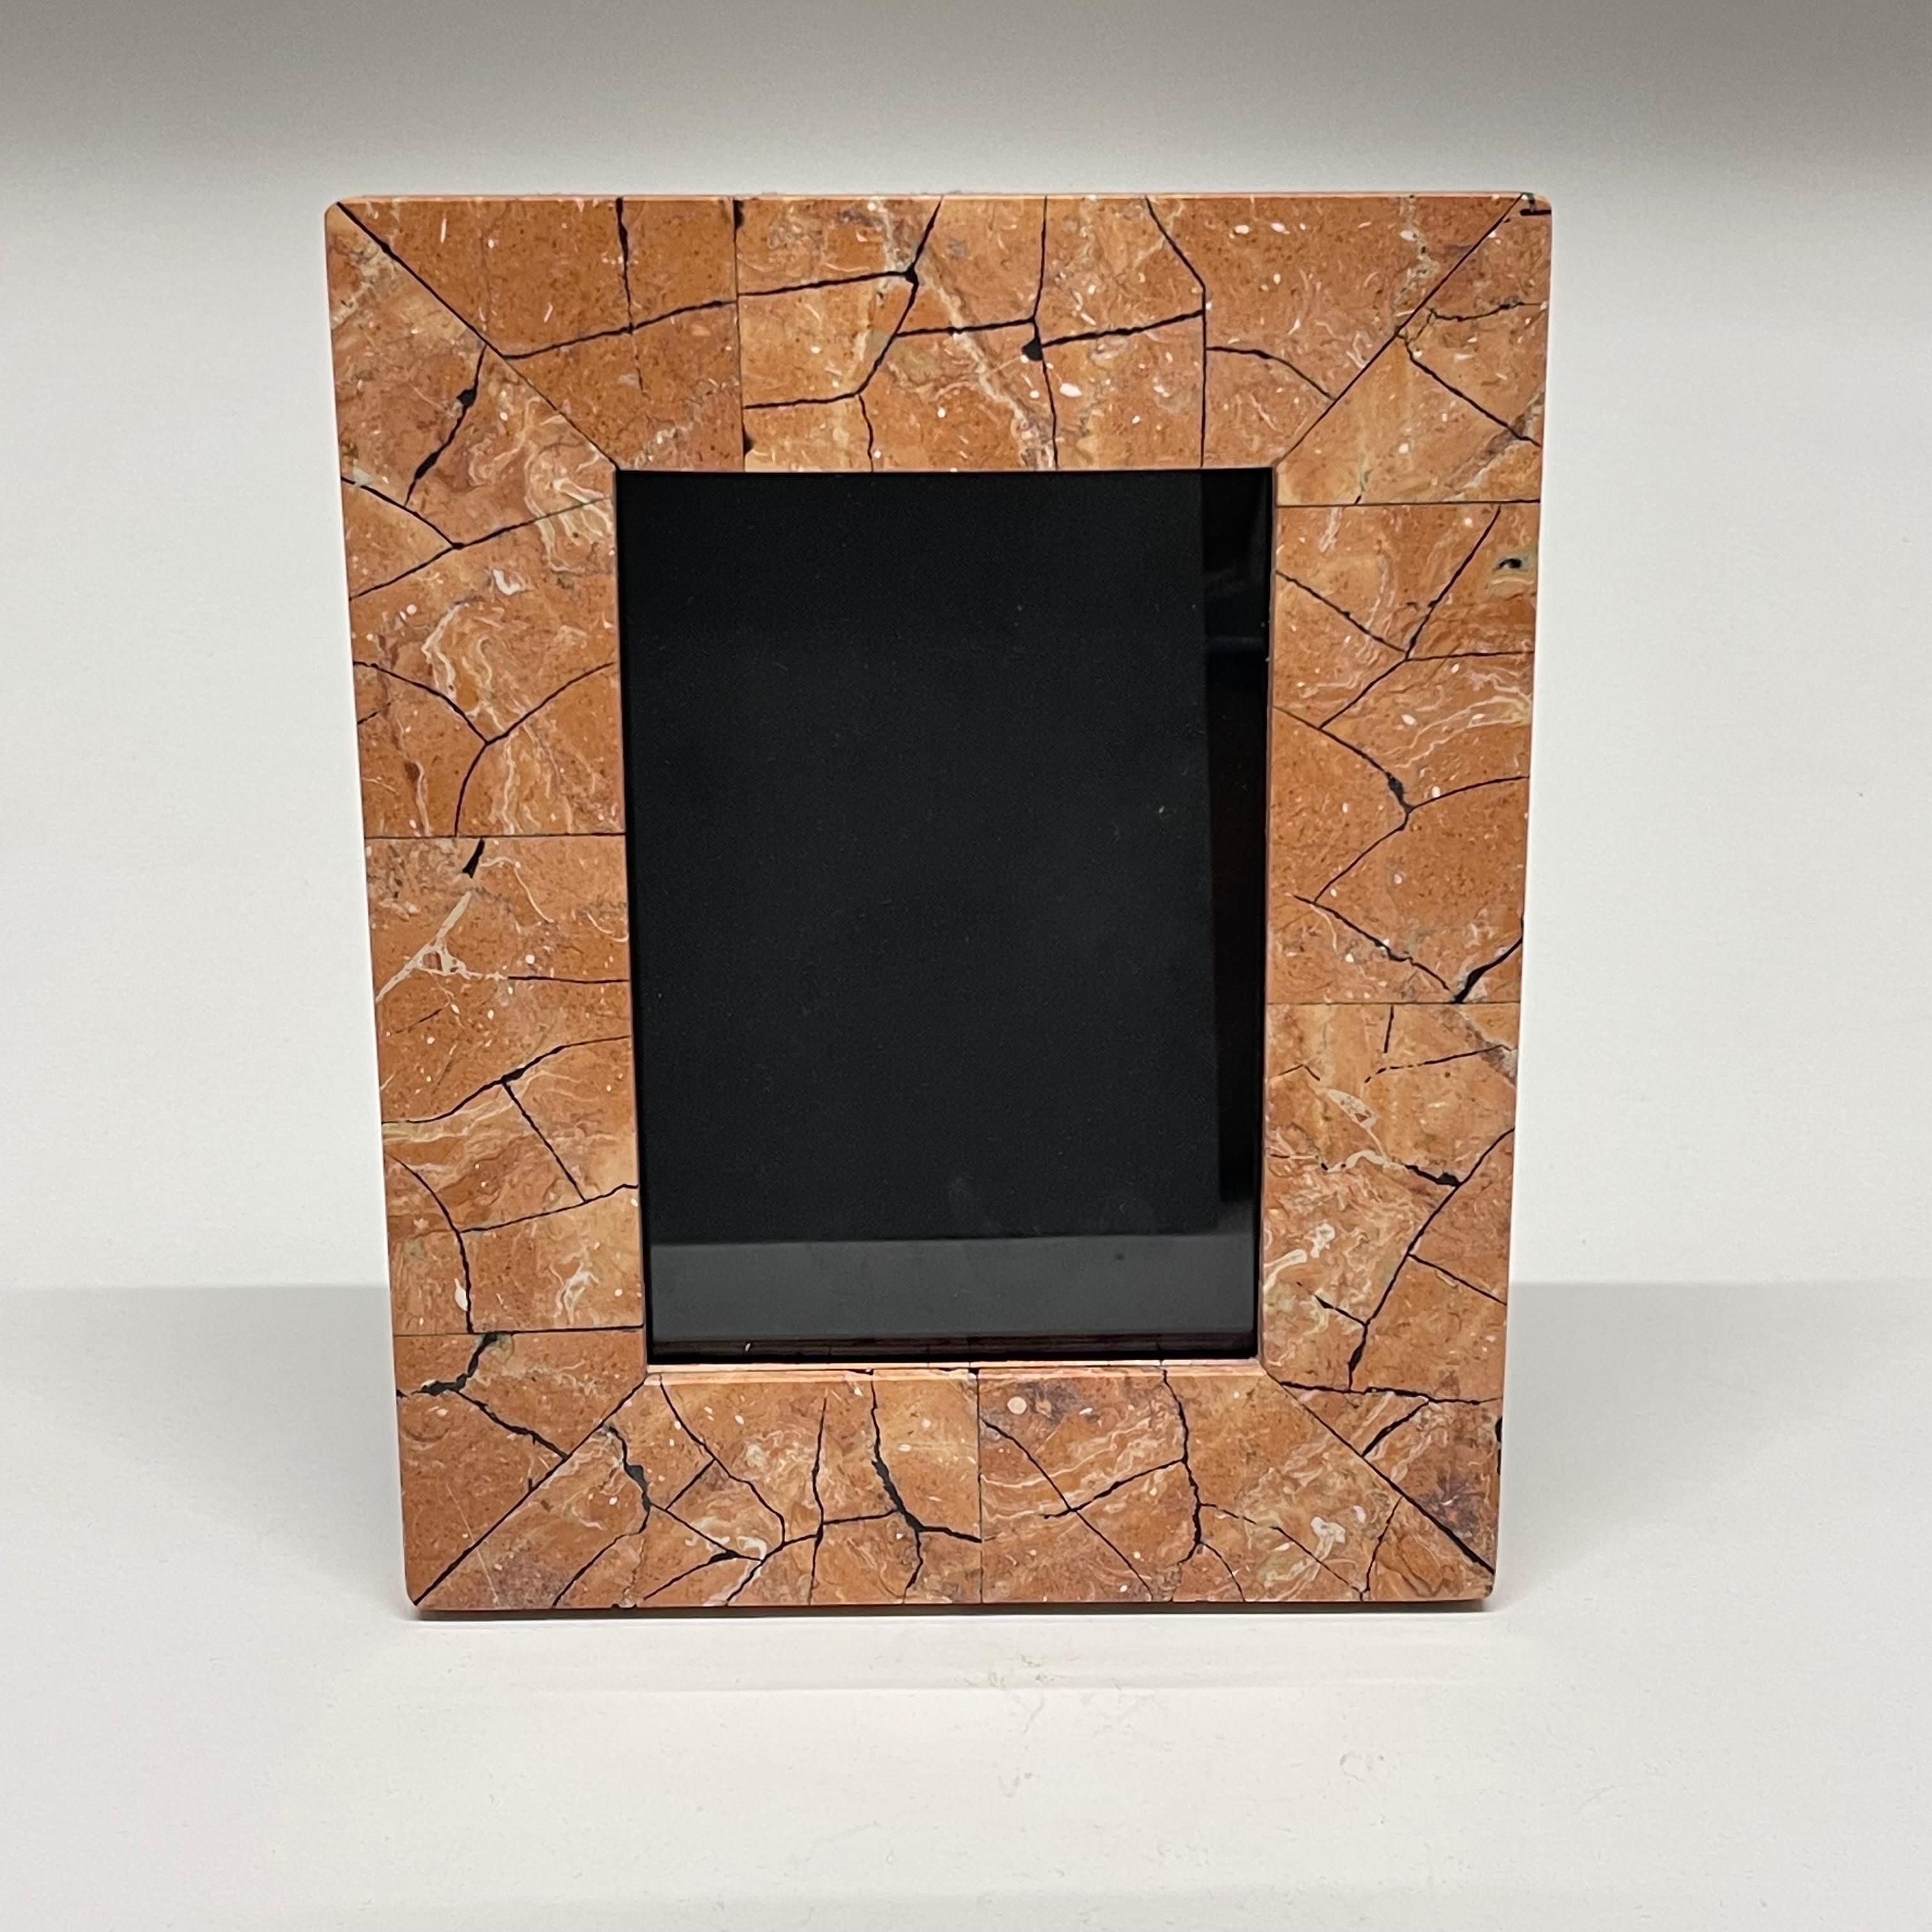 Unique Post Modern picture or photo frame rendered in tessellated mosaic salmon pink travertine stone, lined in black felt velvet, by Maitland-Smith, Philippines, Circa 1980s.